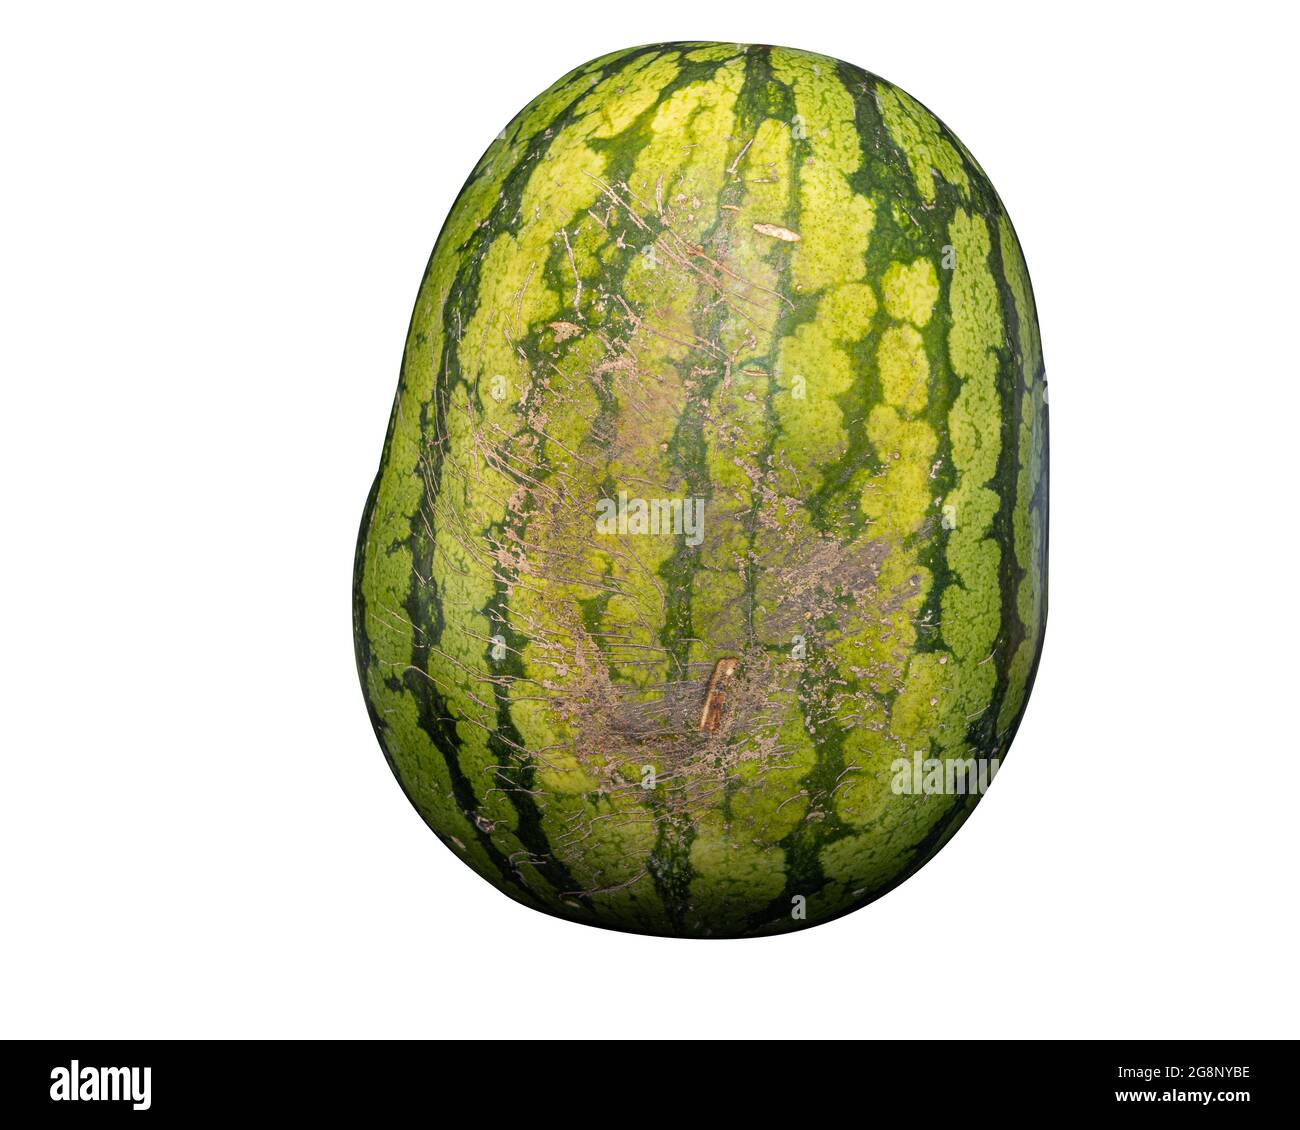 Whole watermelon with webbing, isolated on a white background Stock Photo -  Alamy